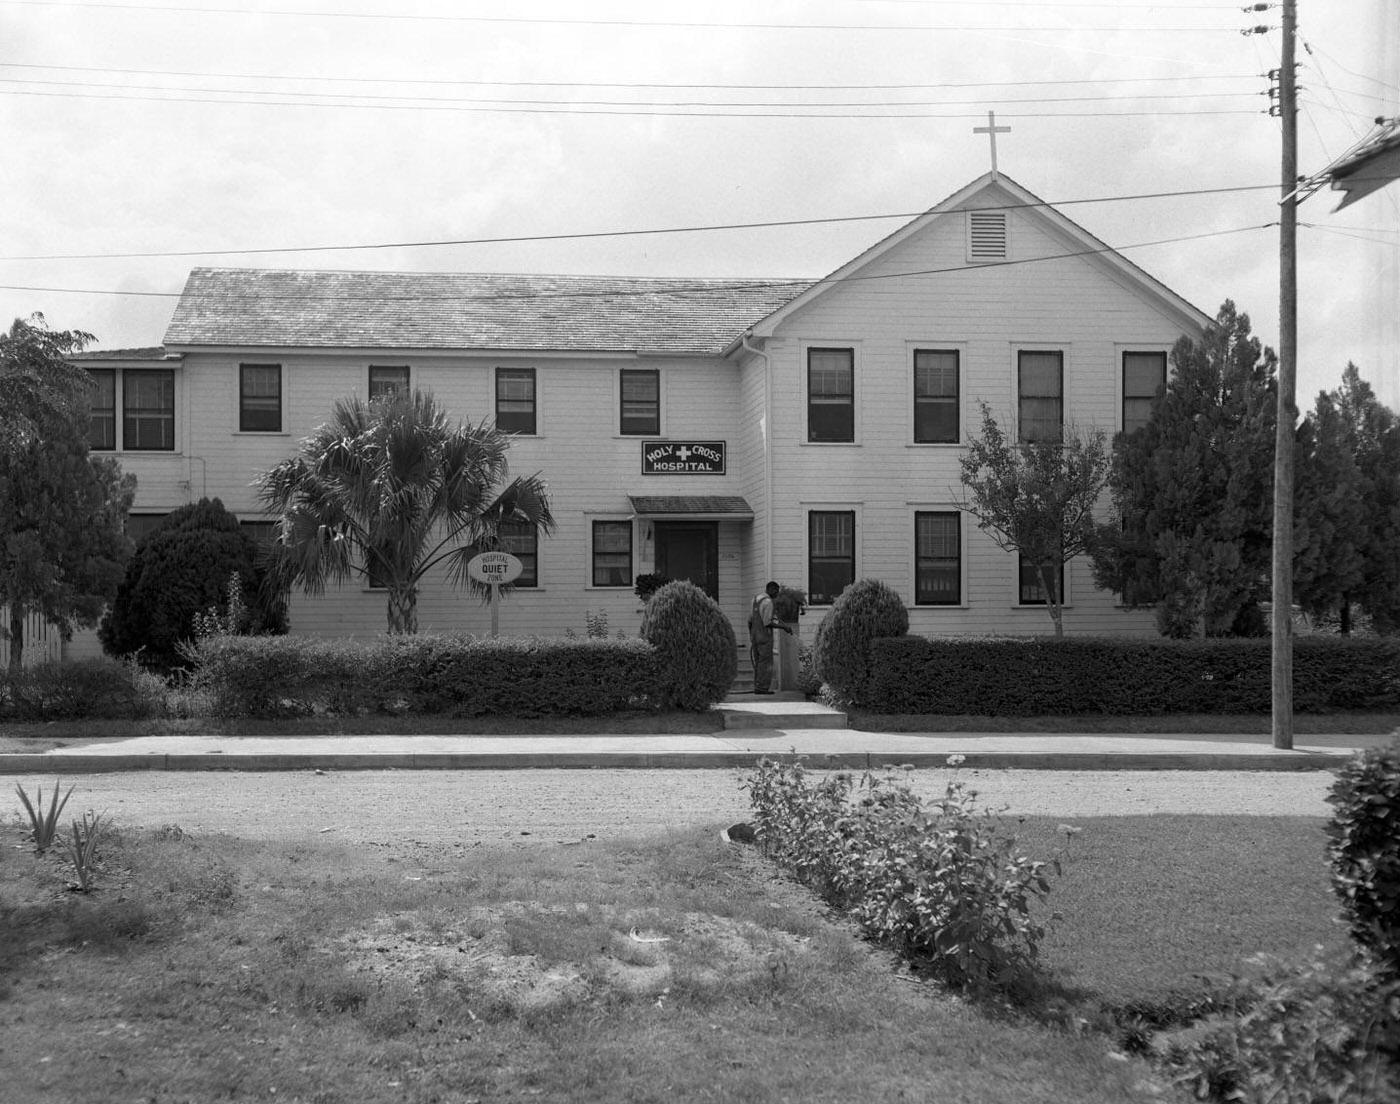 Holy Cross Hospital with Man Watering Yard, 1950.